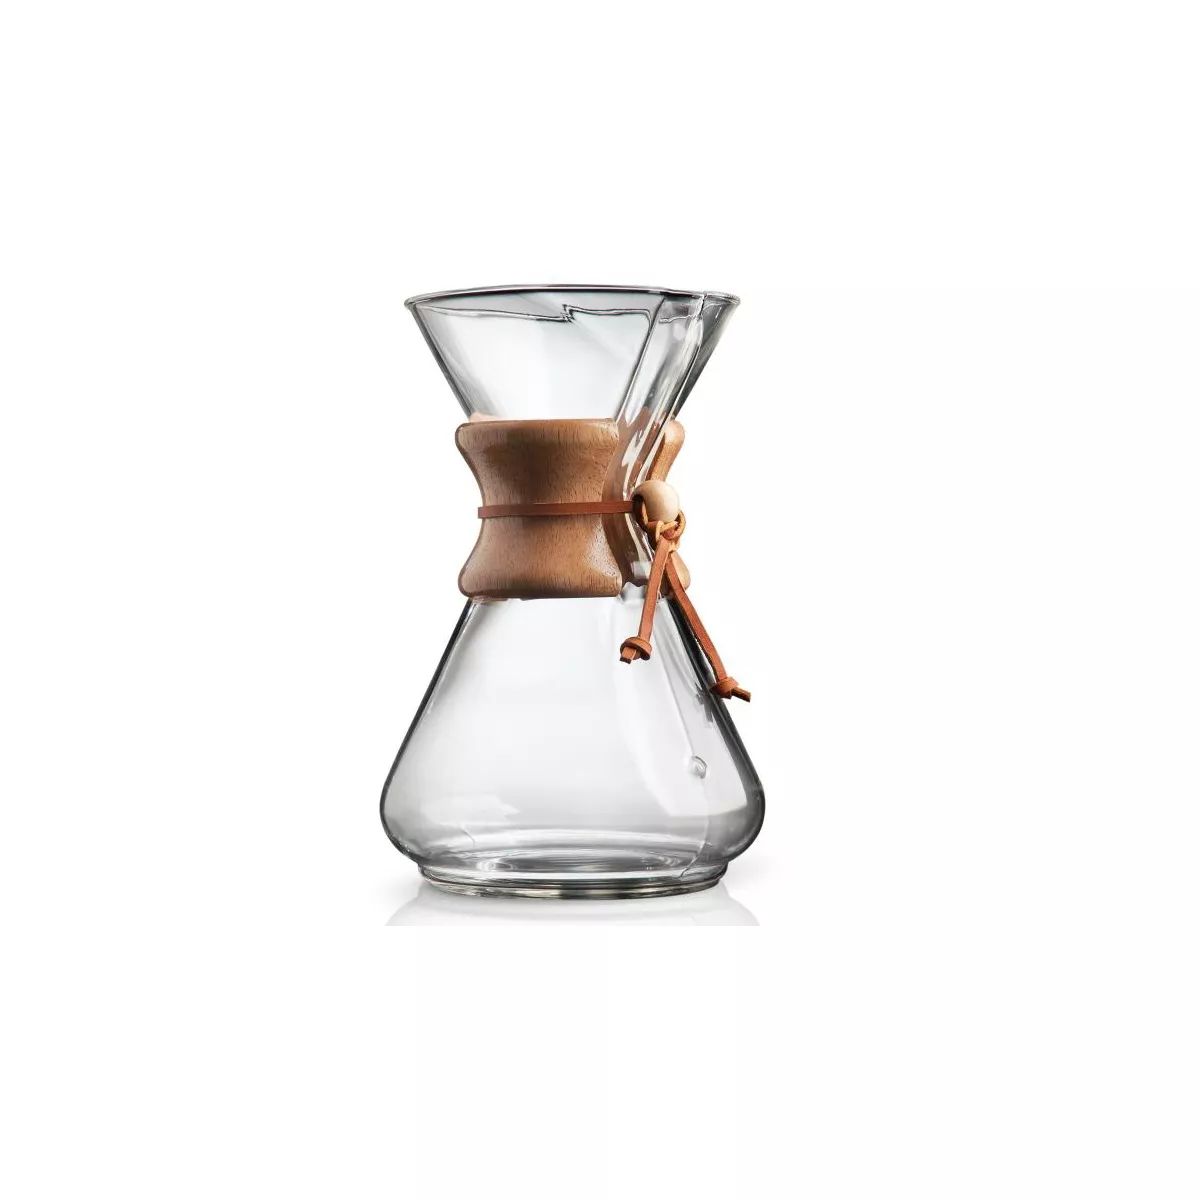 Chemex Pour-Over Glass Coffeemaker - Classic Series - 10-Cup - Exclusive Packaging | Target